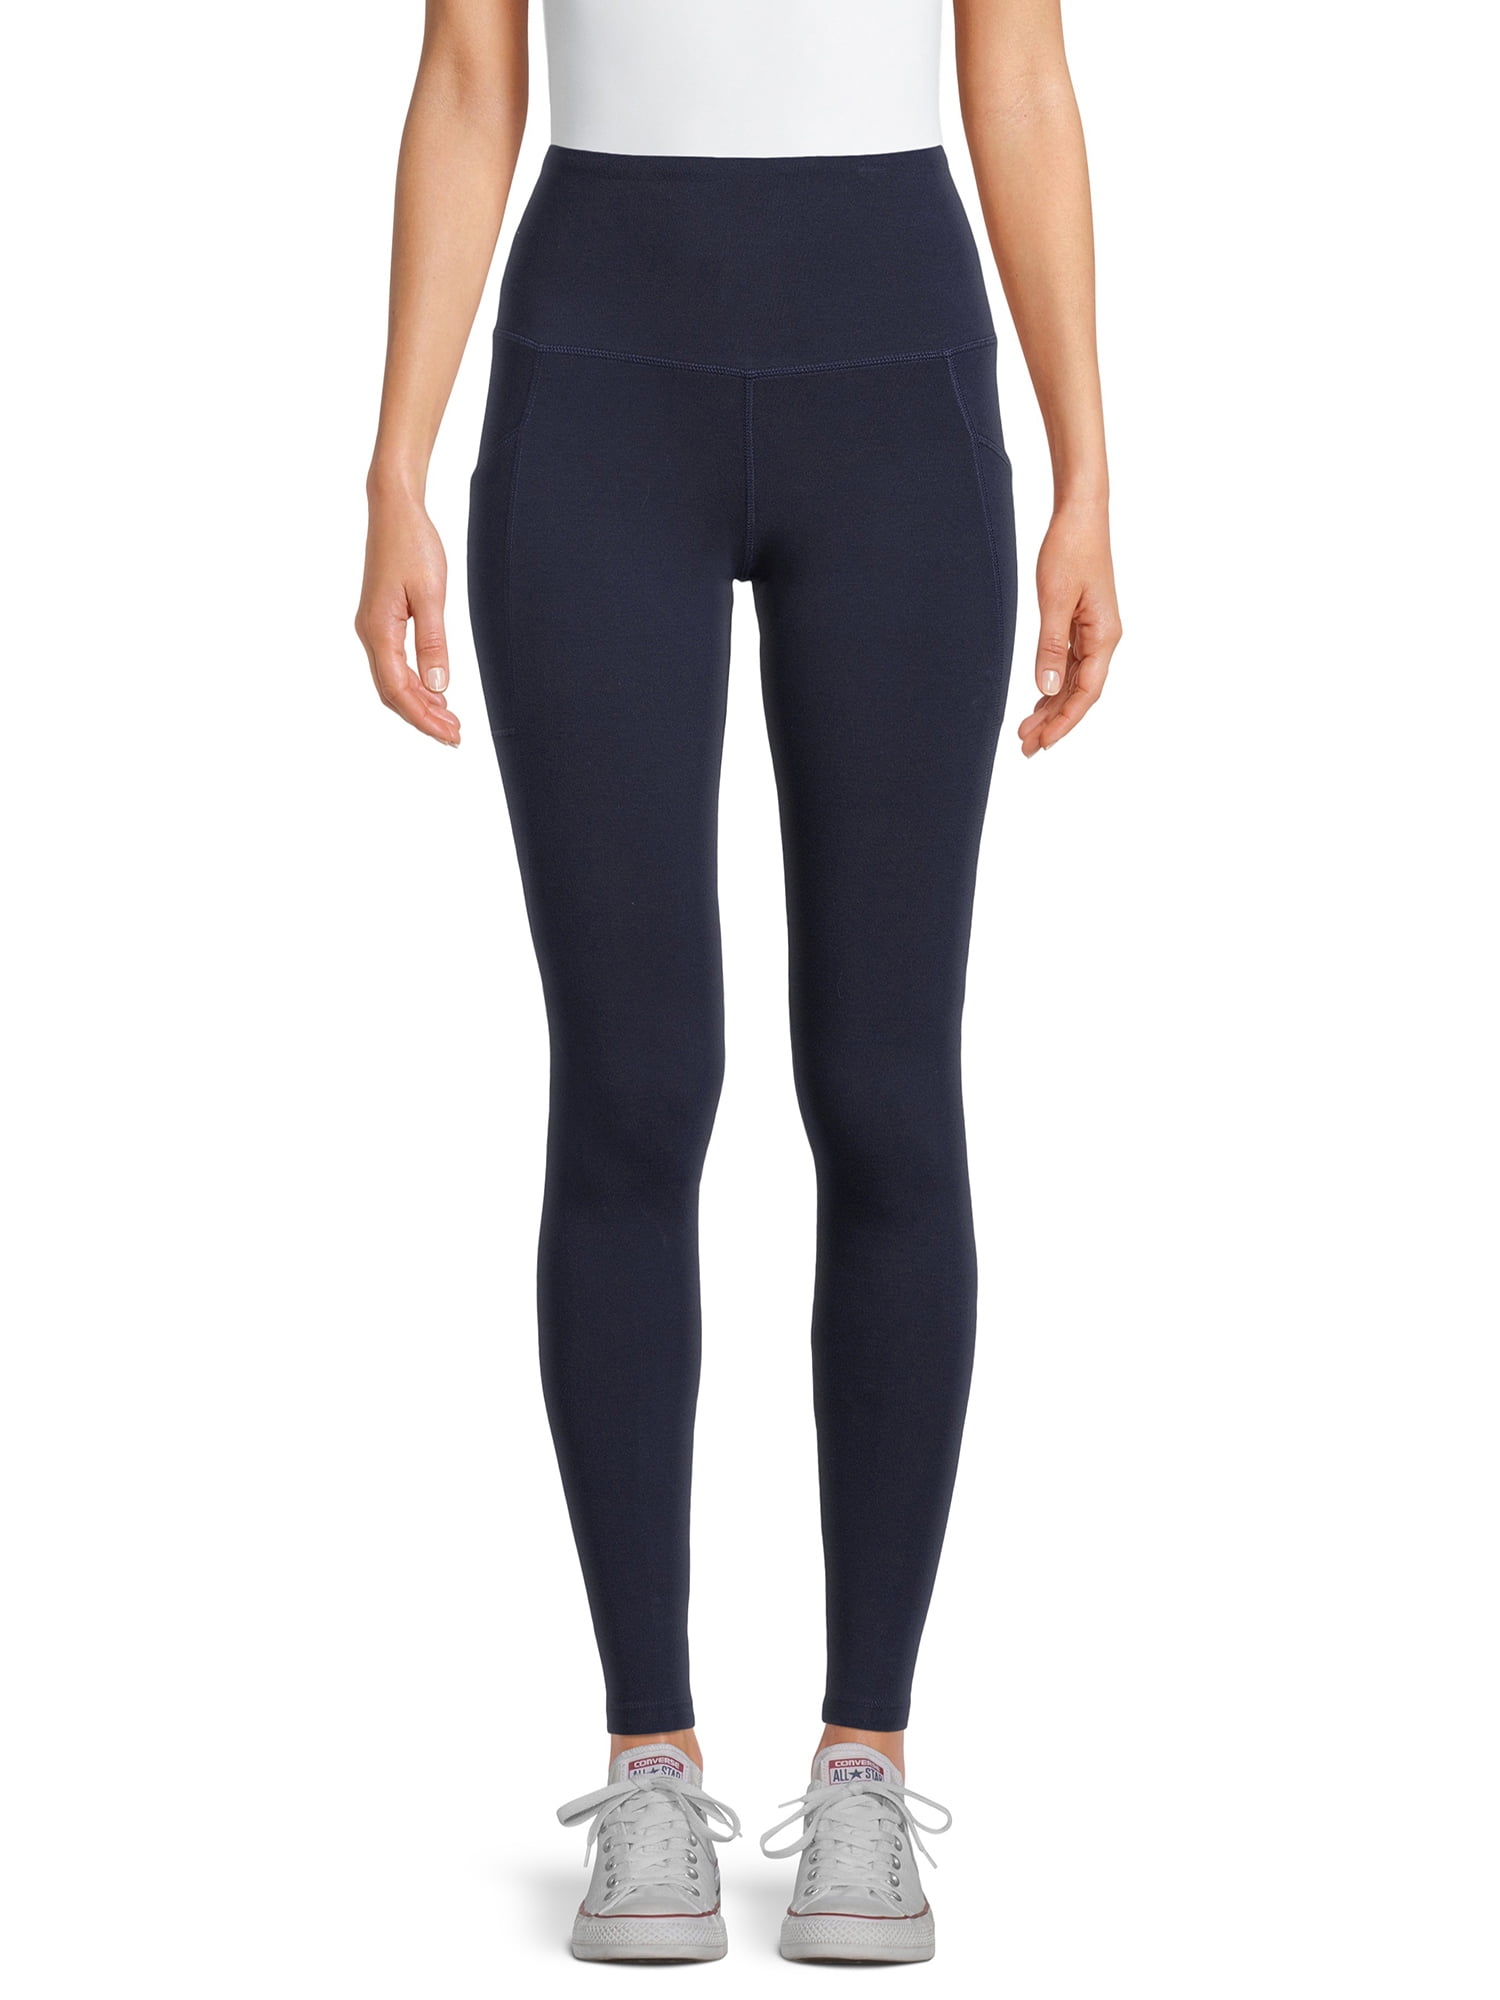 Jockey Essentials Women's Cotton-Blend Ankle Leggings with Side Pockets